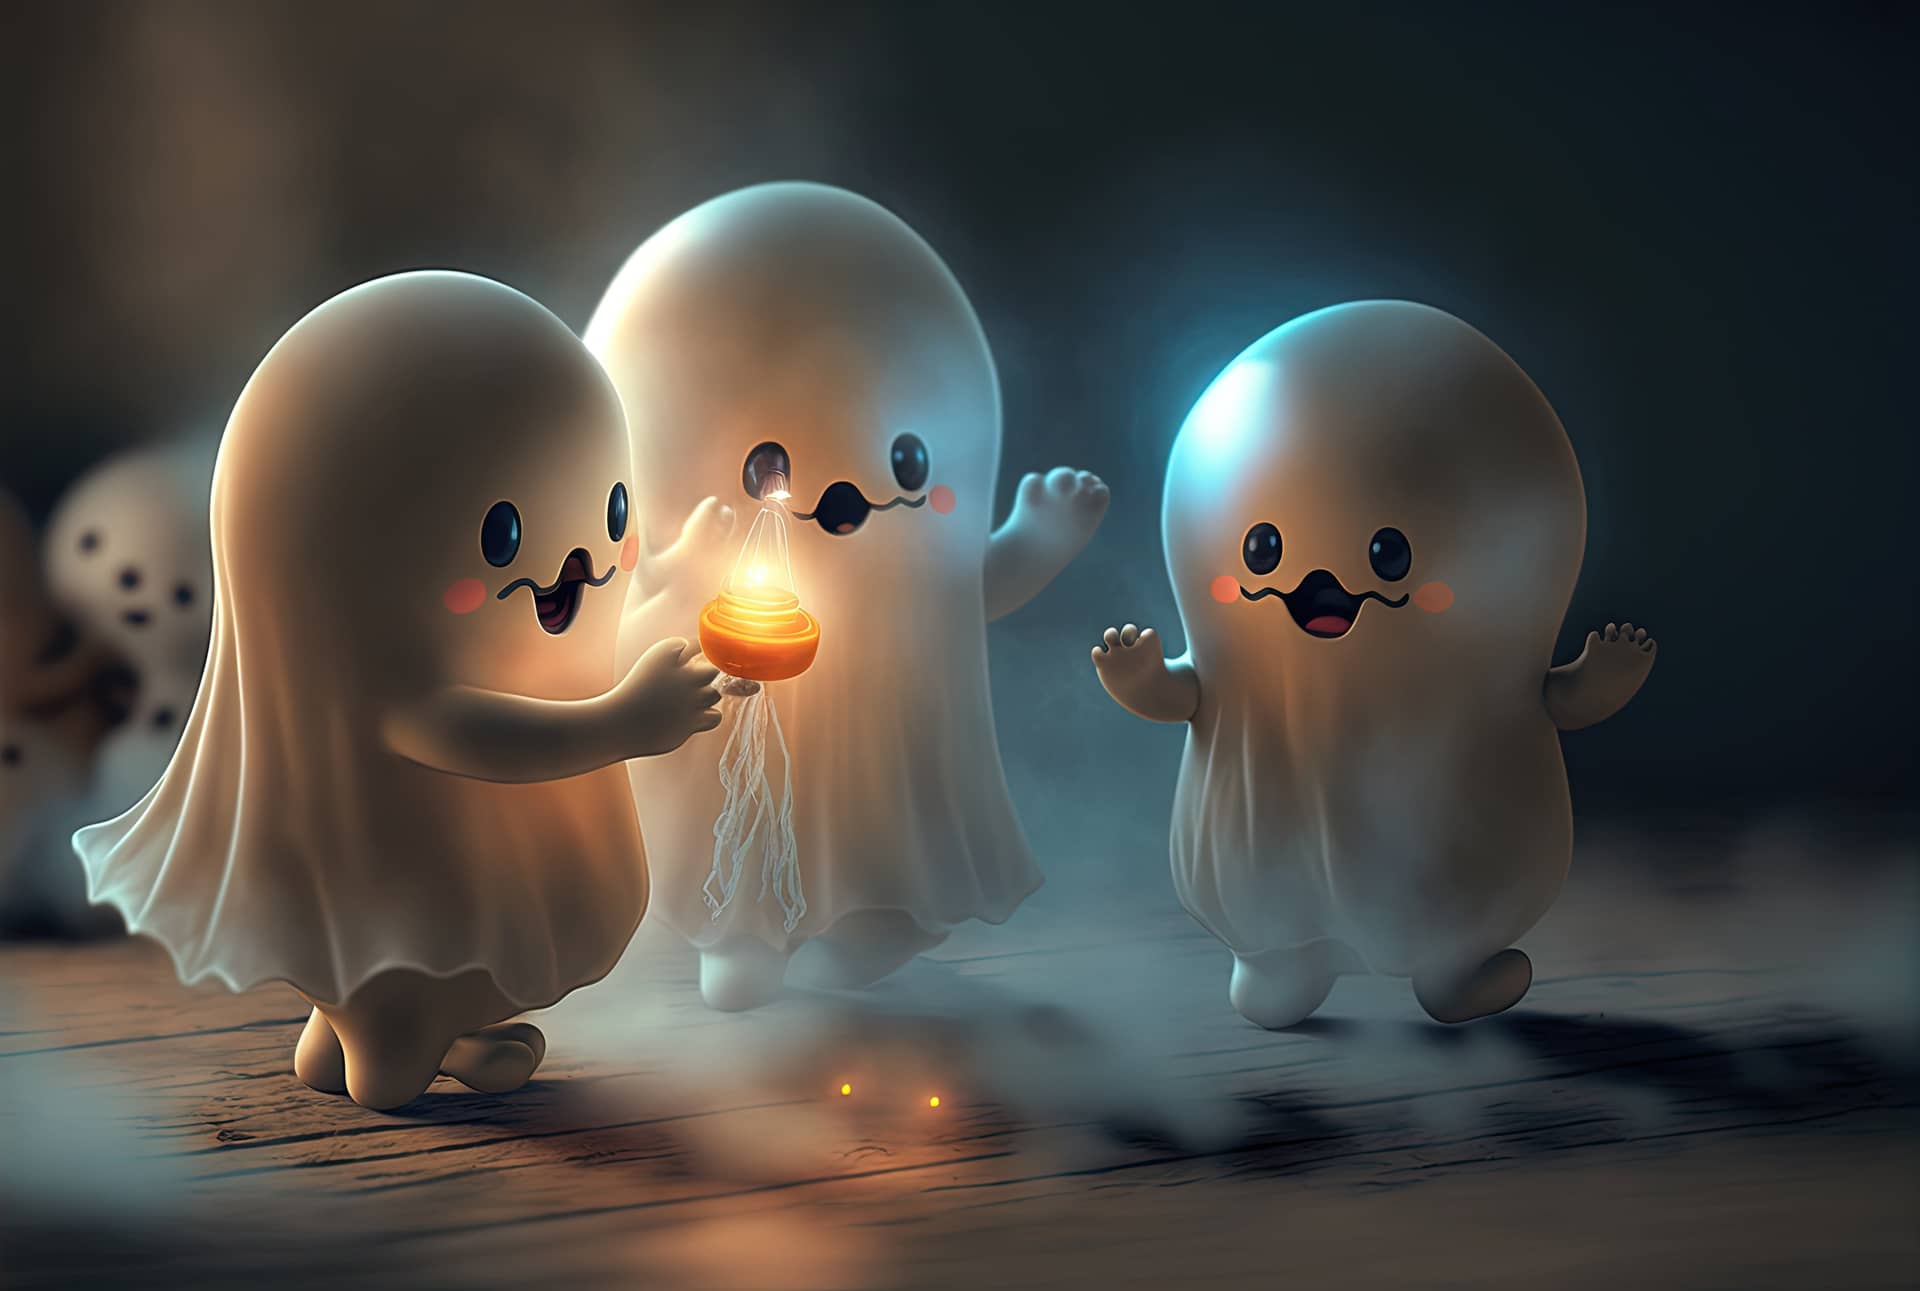 Cute so scary ghost playing having fun generative excellent picture